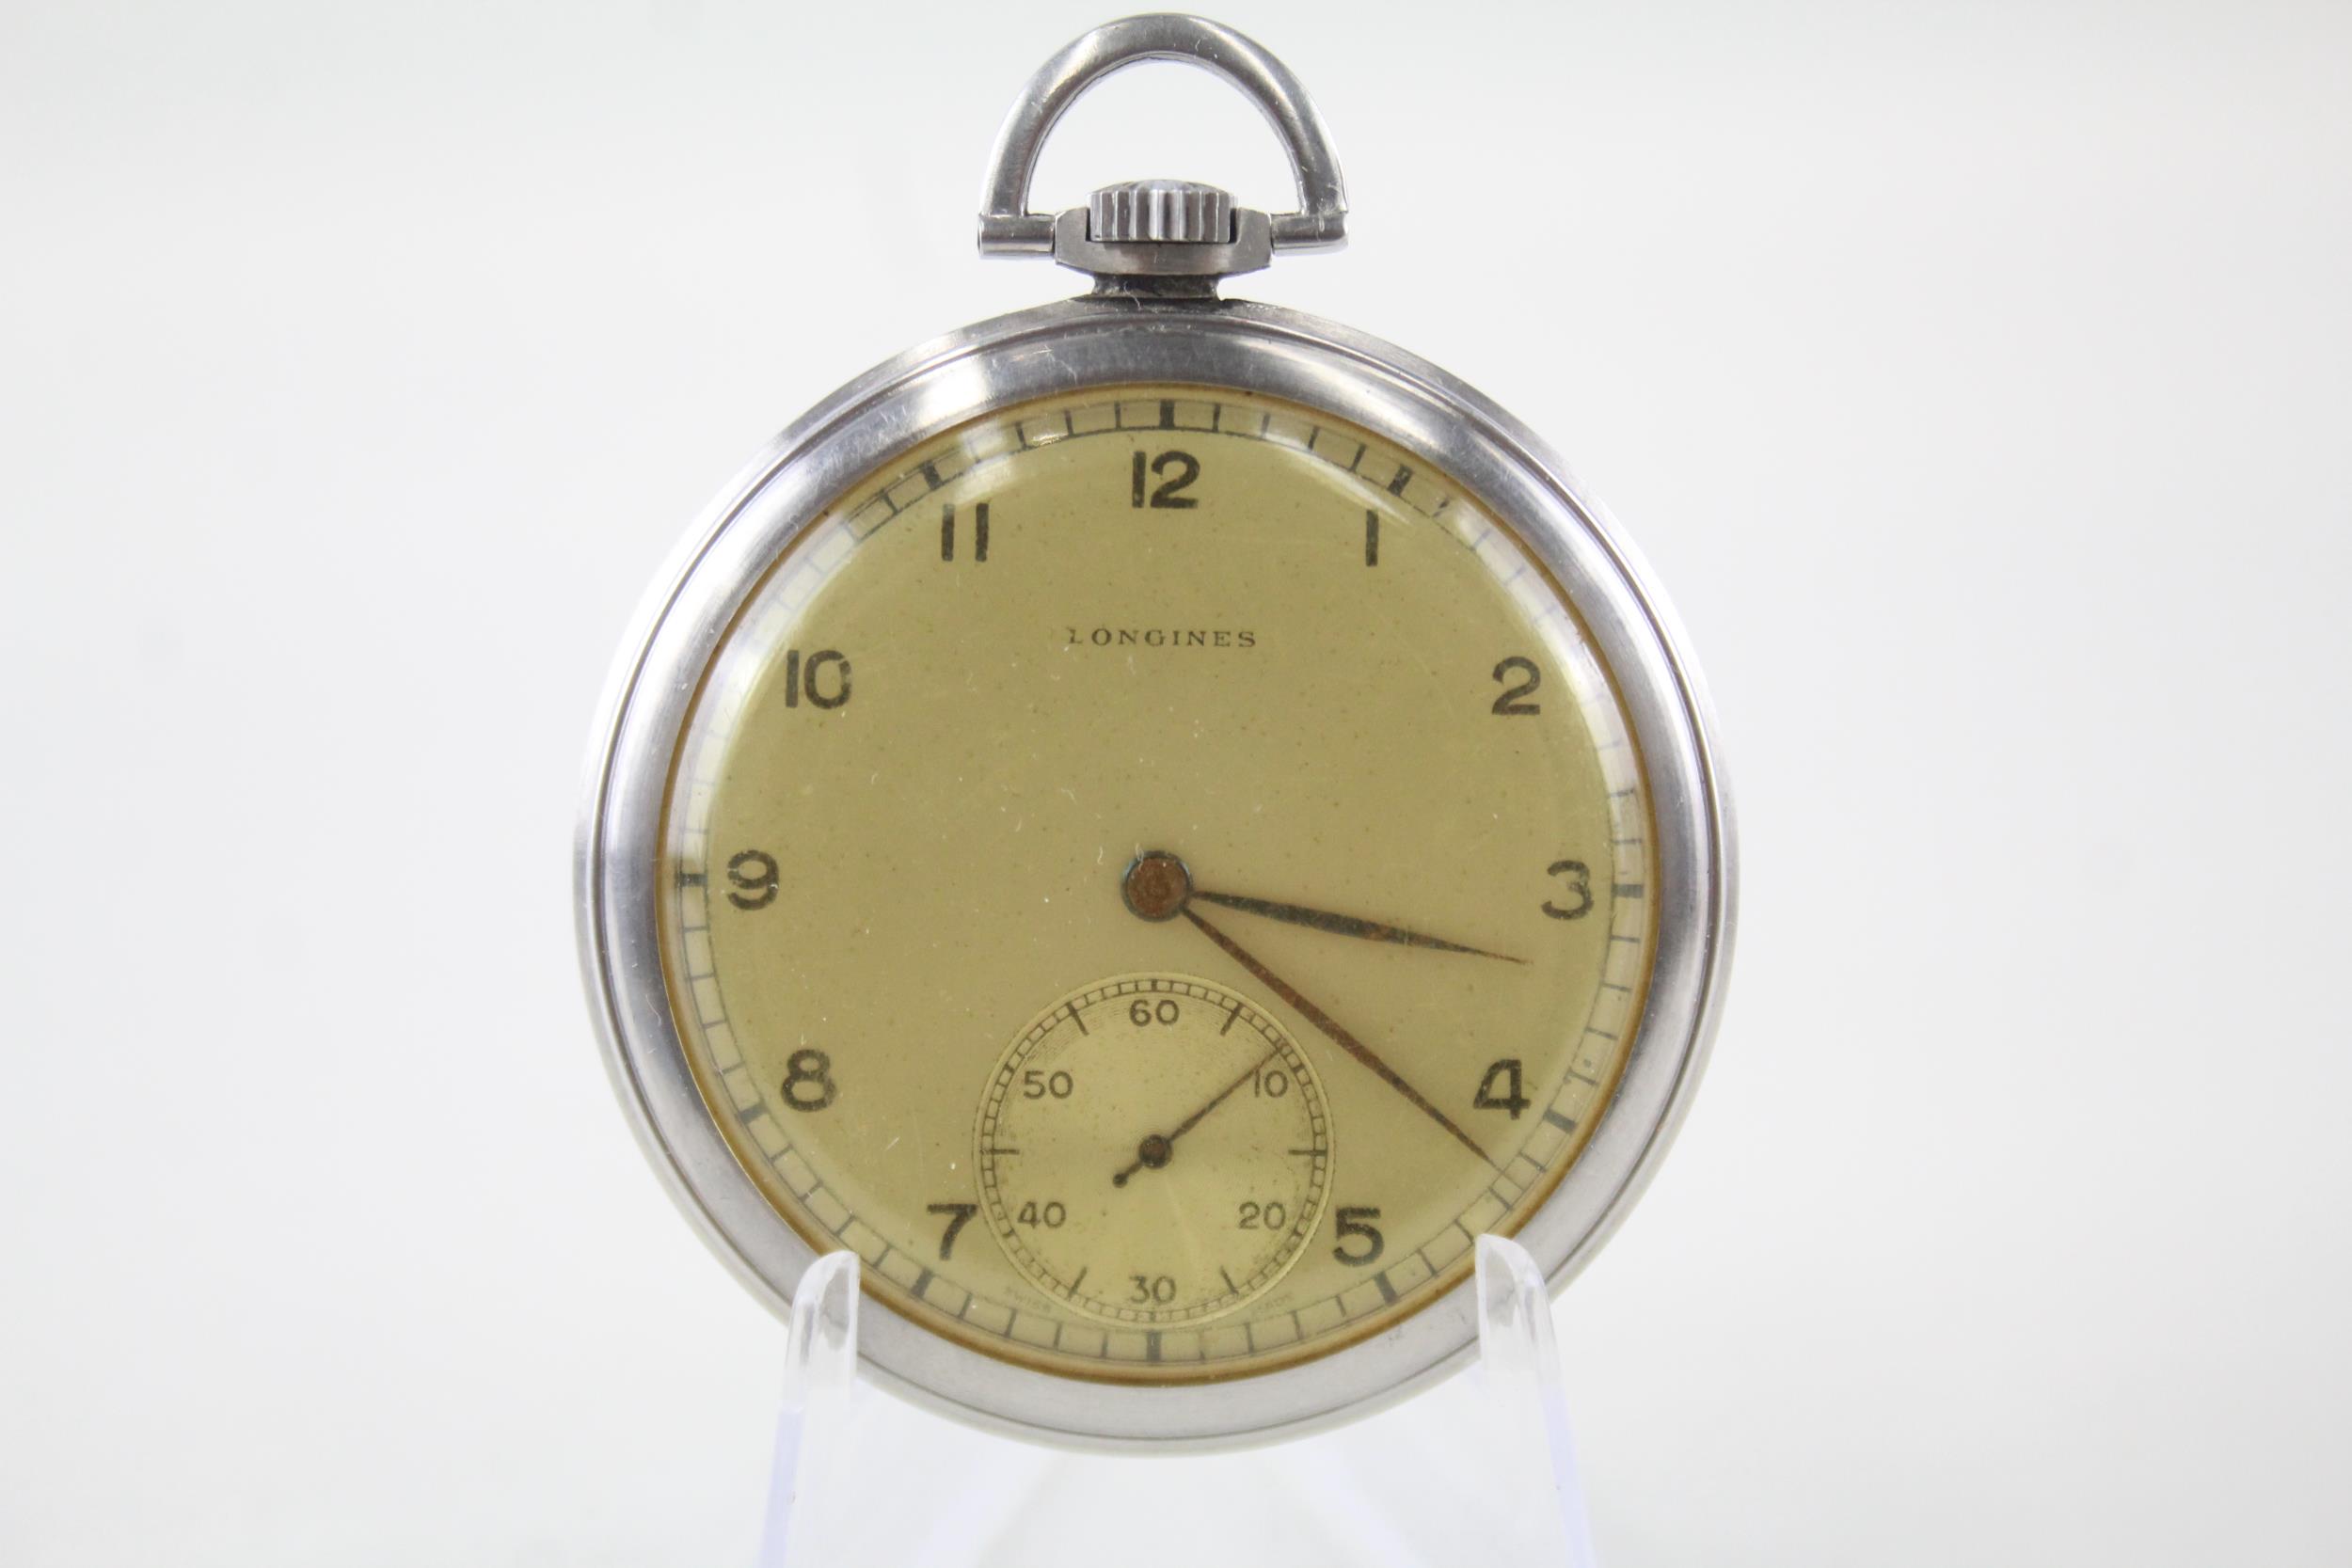 LONGINES Gents Vintage Open Face Pocket Watch Hand-wind WORKING Boxed - LONGINES Gents Vintage - Image 2 of 4